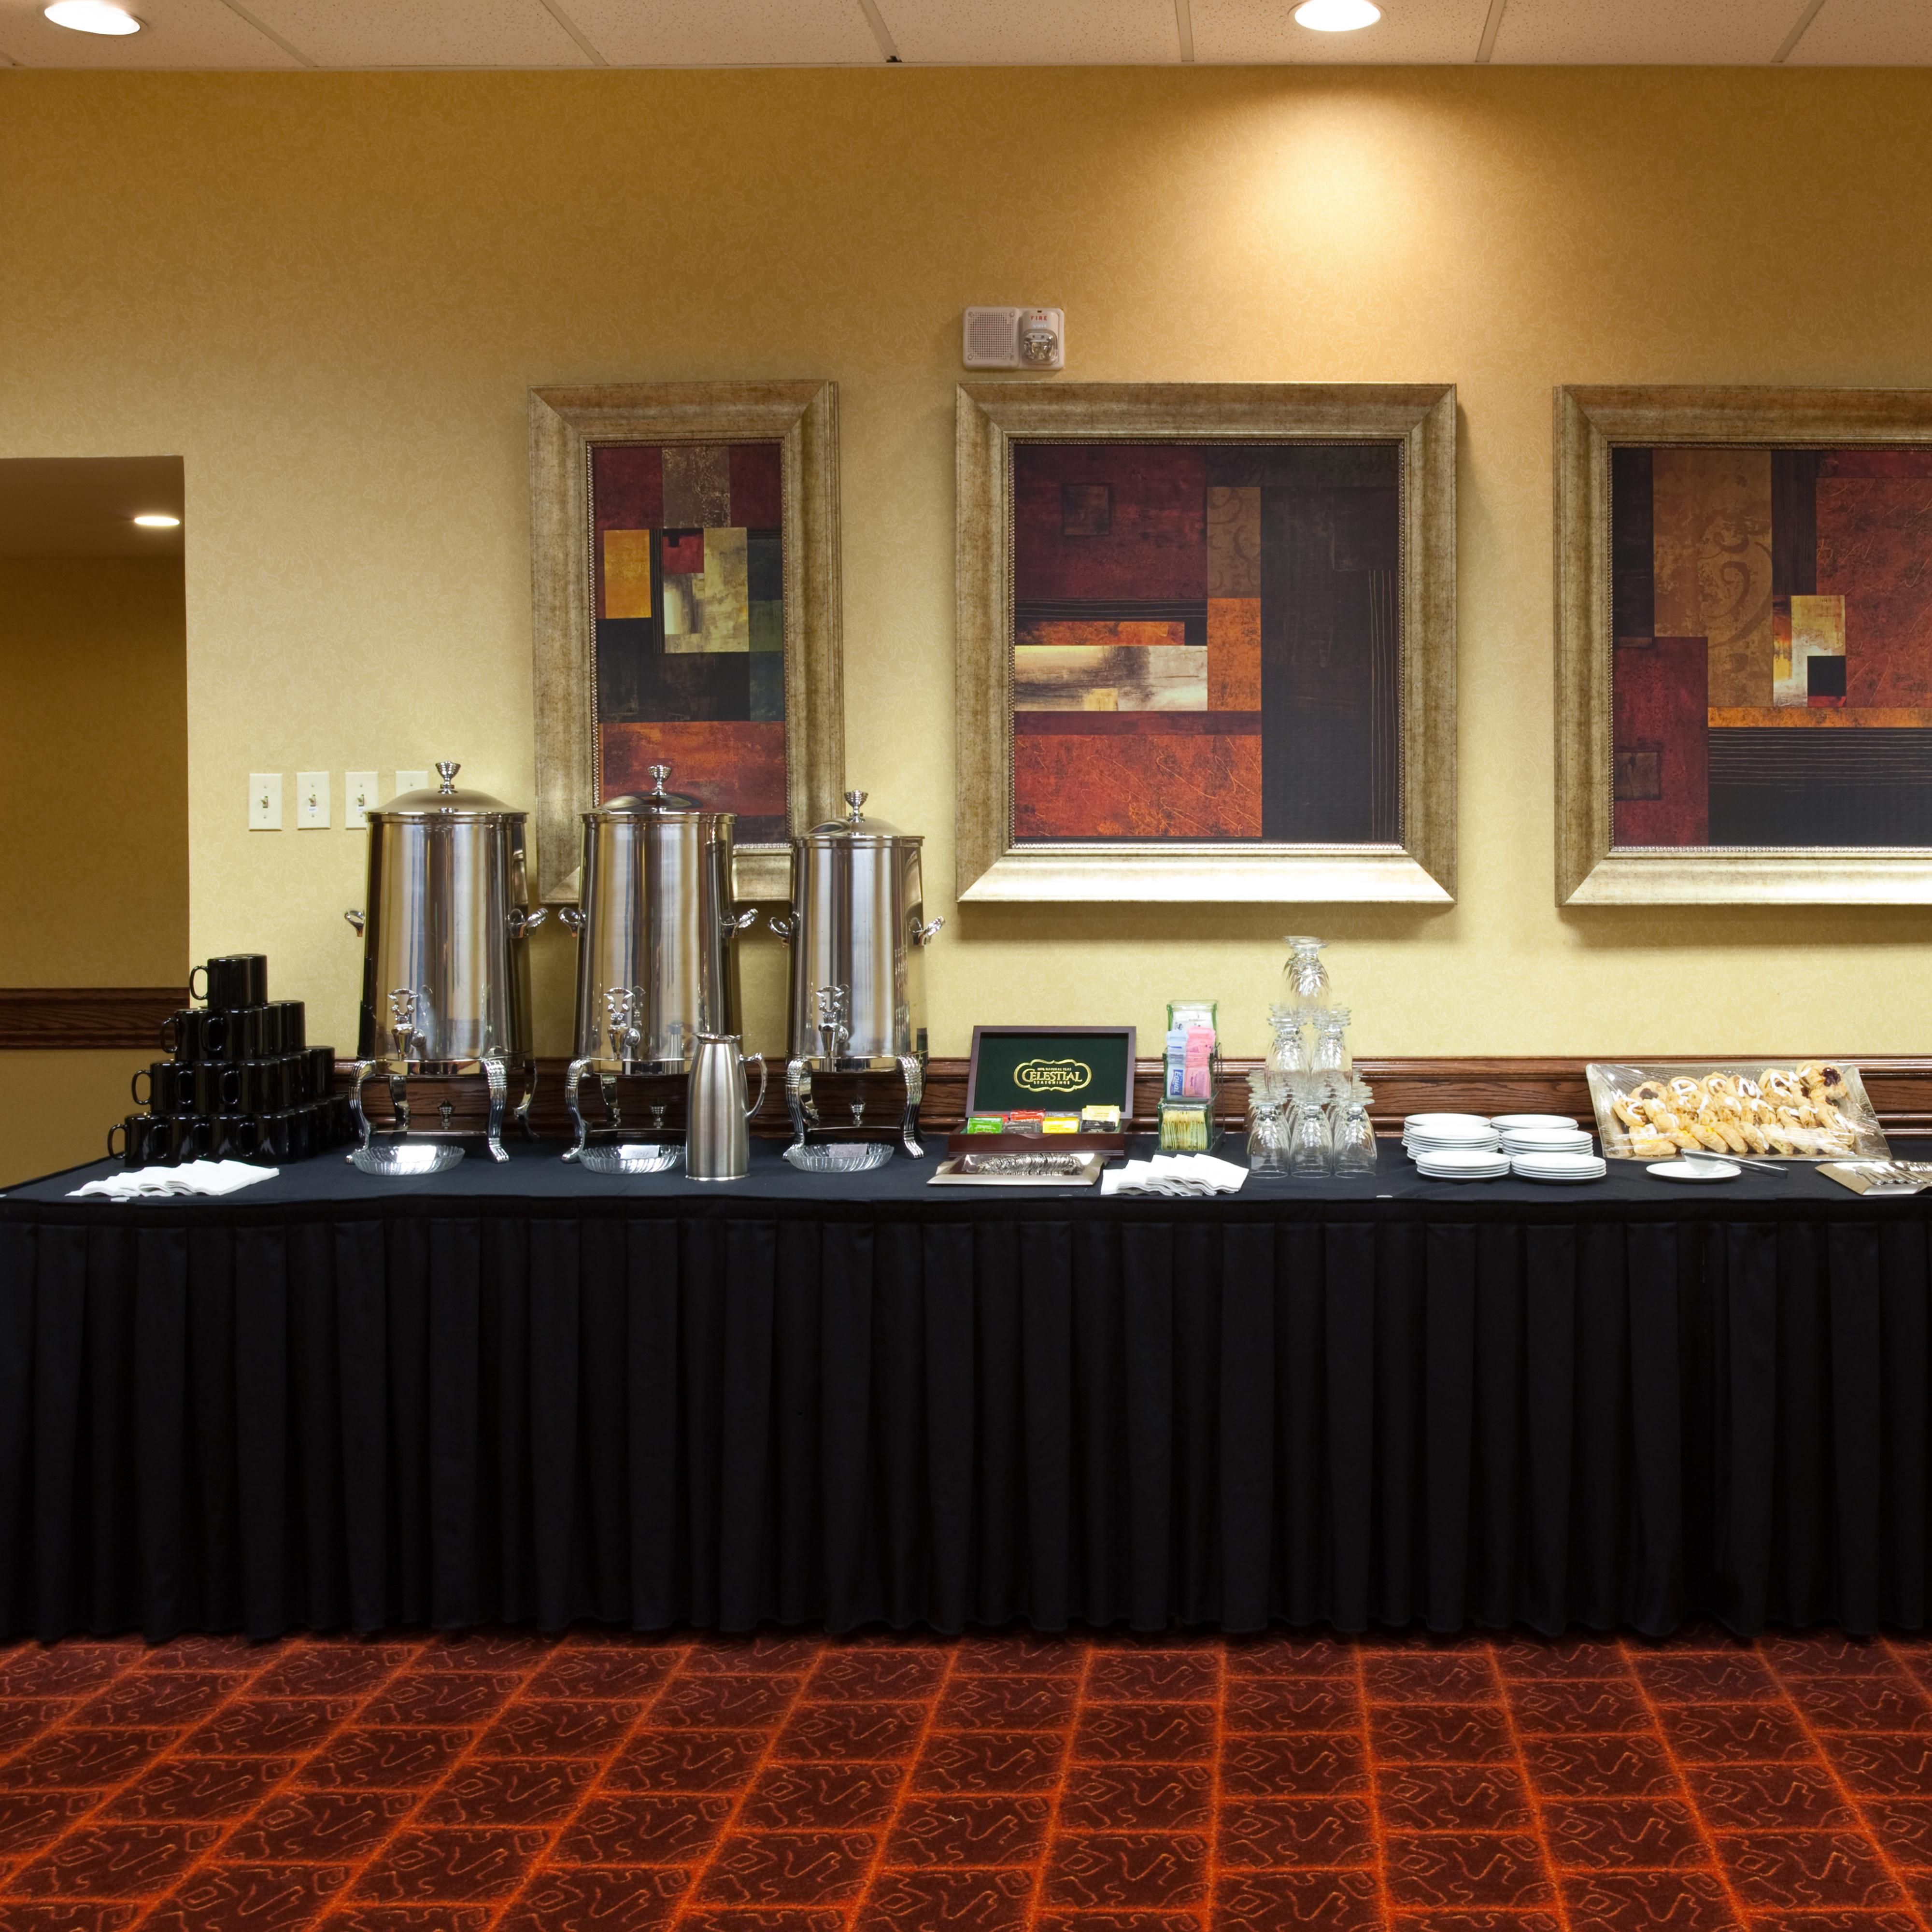 Full five-star amenities with in-house catering, coffee and tea.